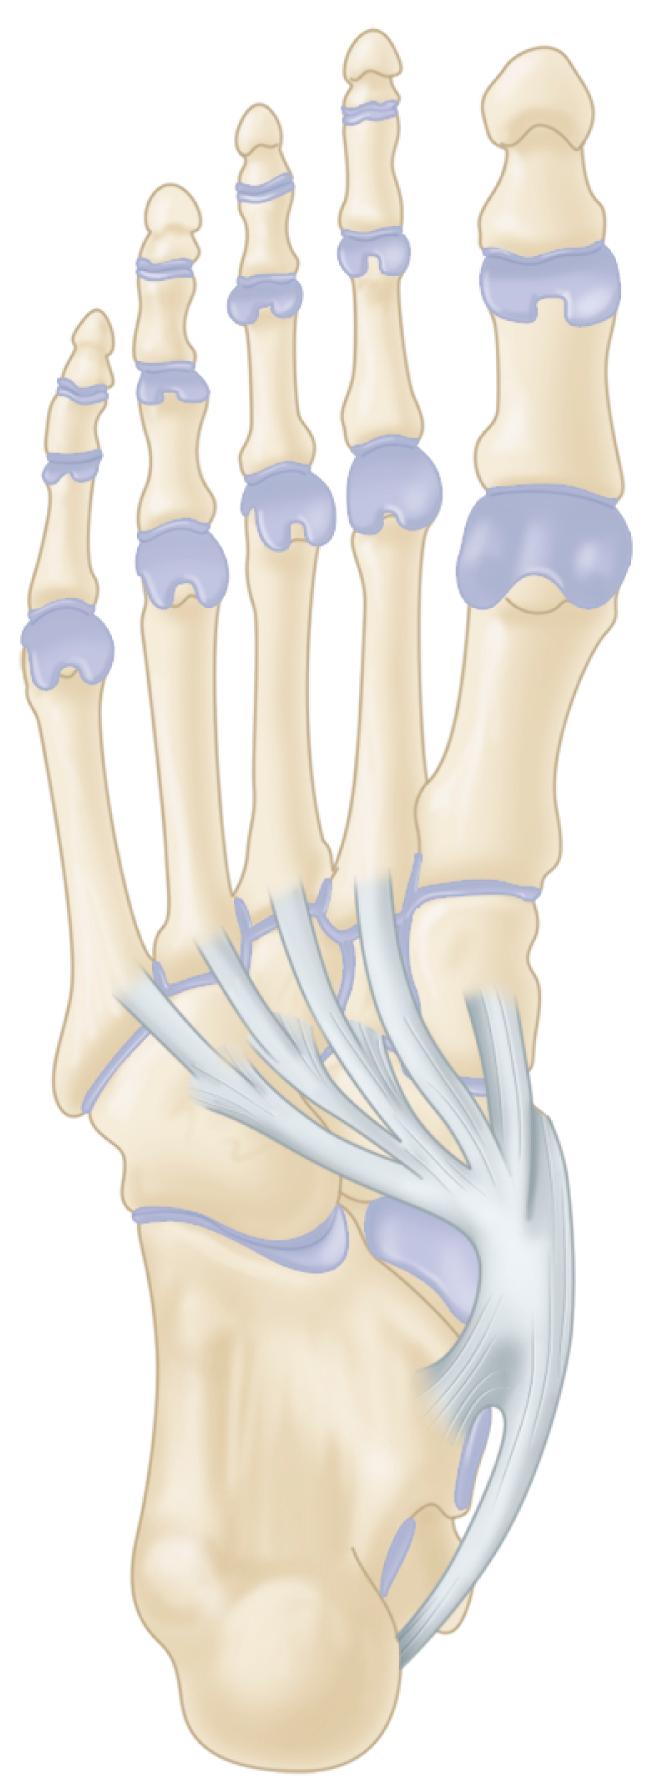 FIGURE 83.3, Posterior tibial tendon inserts into medial tuberosity of navicular (one main slip) and continues through second slip into plantar surface of foot, where it arborizes and inserts into all three cuneiforms, cuboid, and bases of second, third, fourth, and fifth metatarsals.